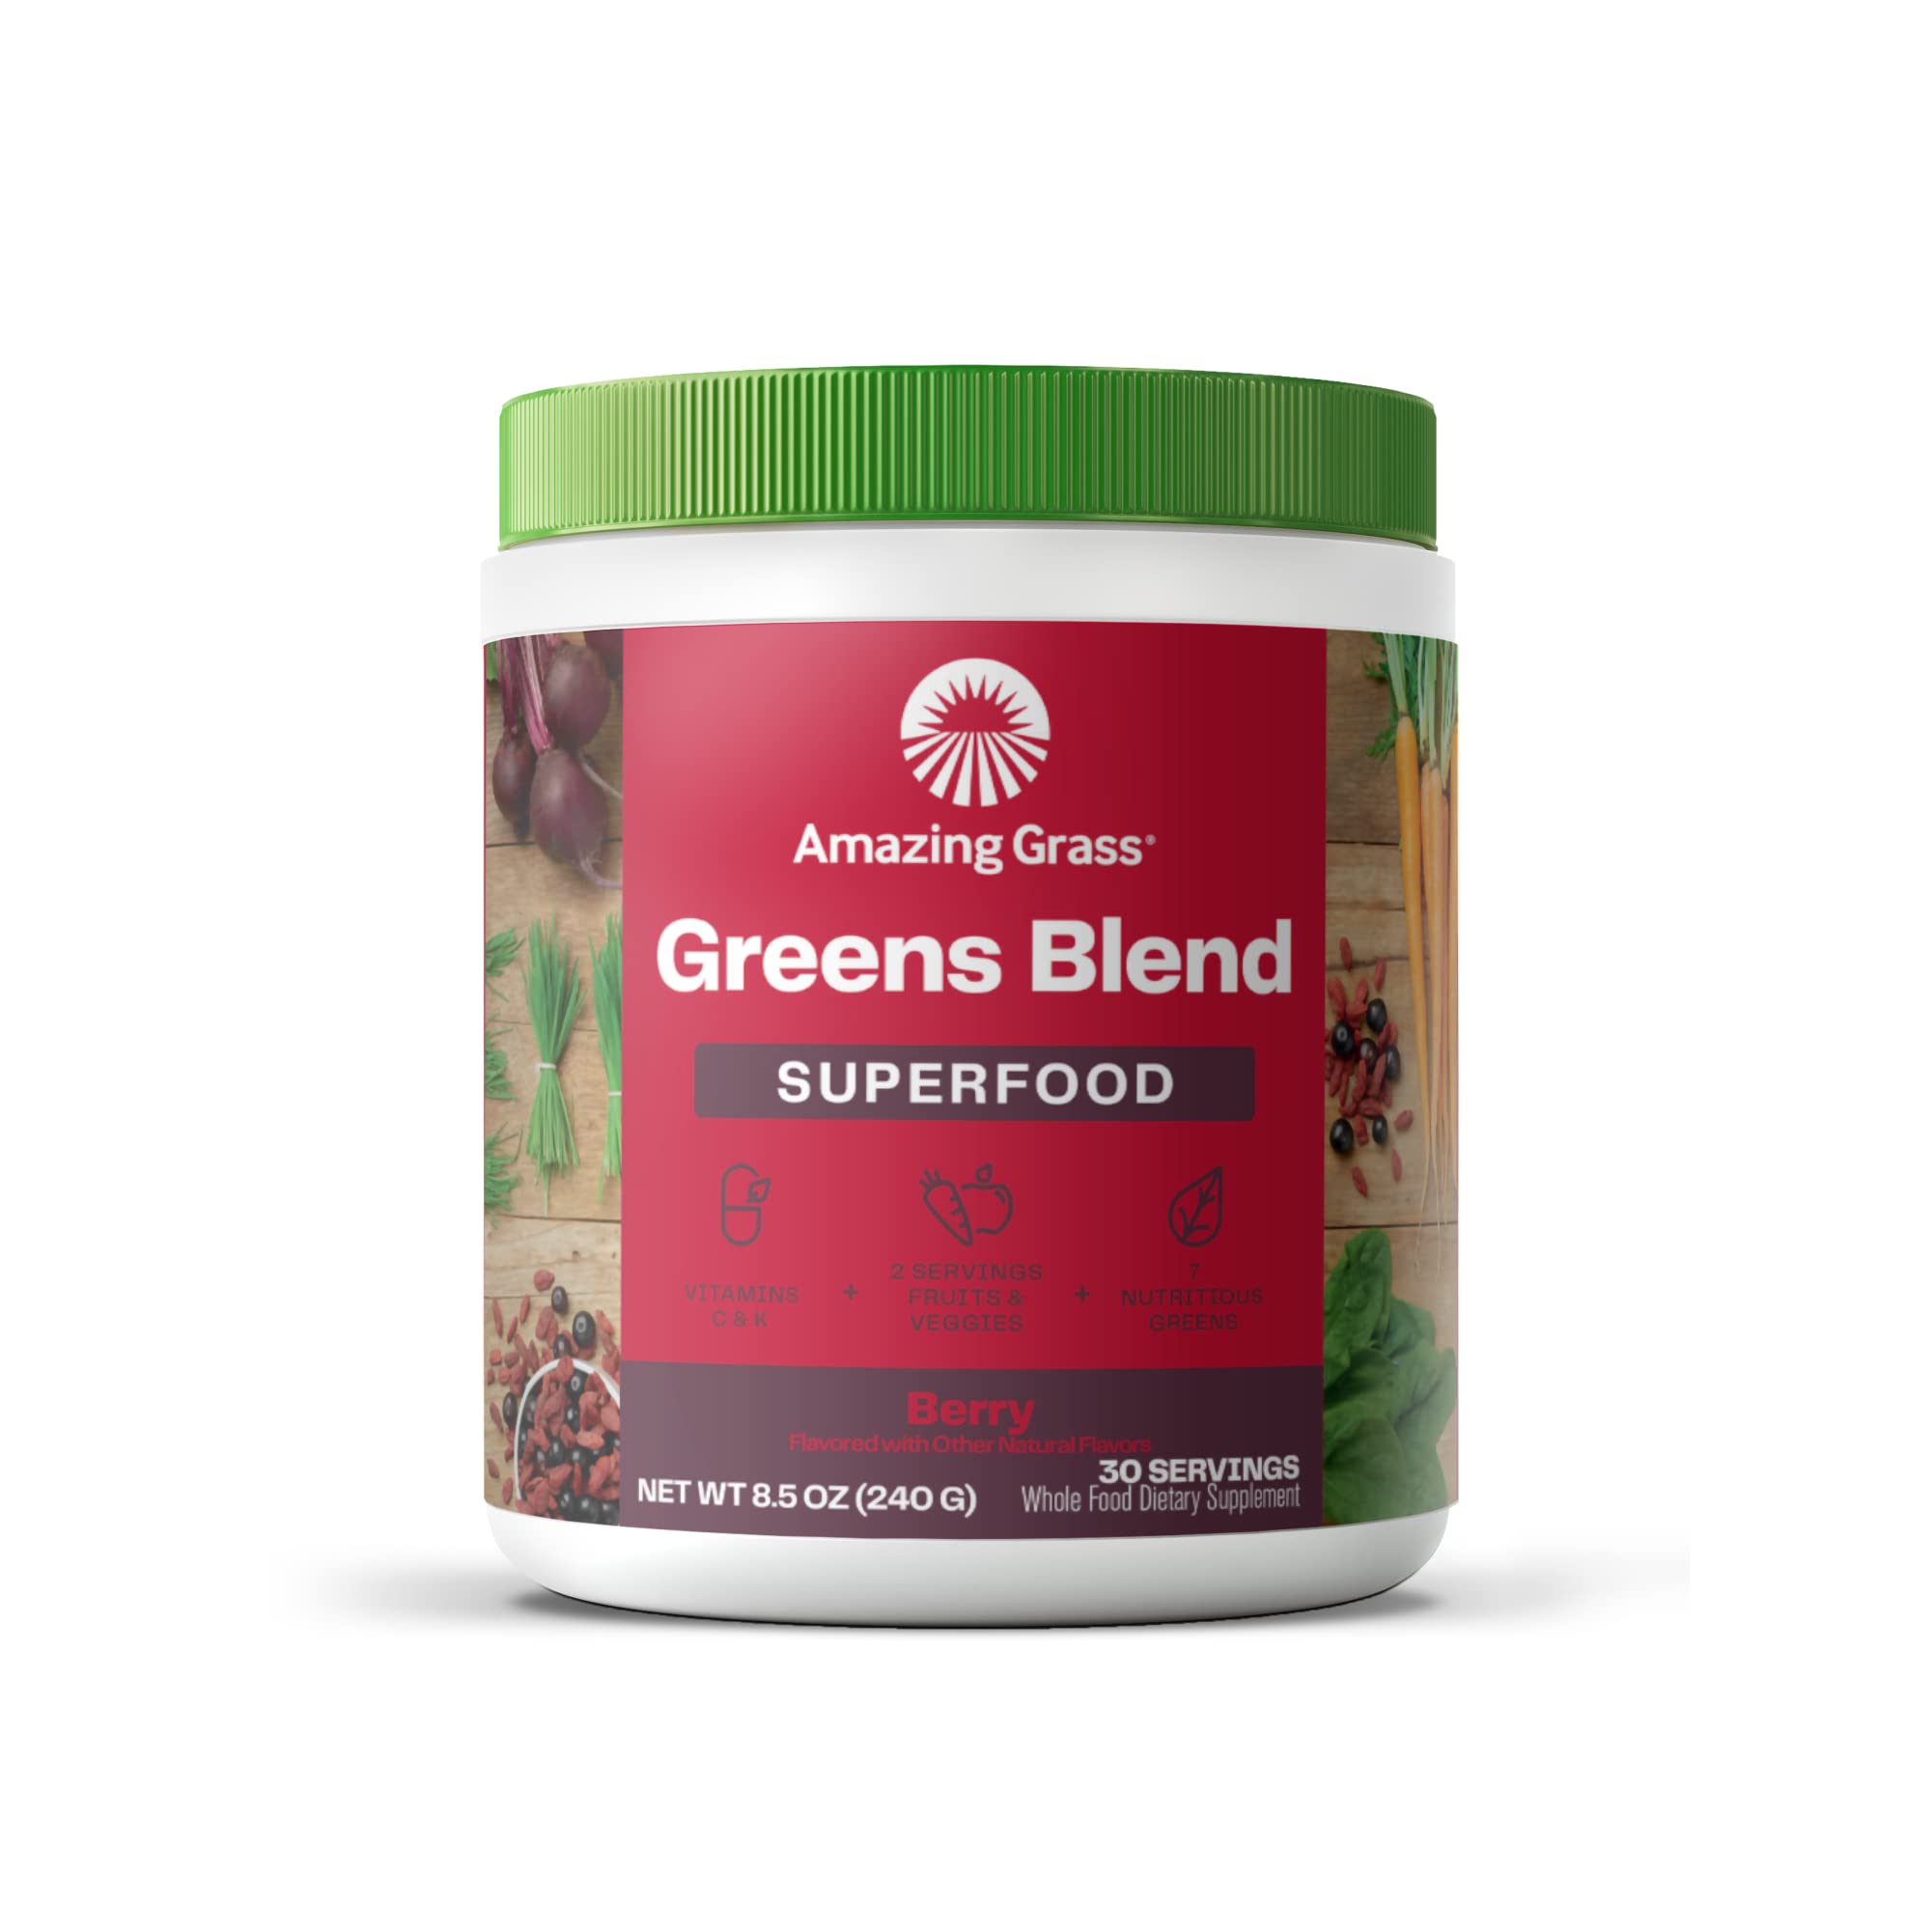 Amazing Grass Greens Blend Superfood: Super Greens Powder Smoothie Mix with Organic Spirulina & Greens Blend Superfood: Super Greens Powder Smoothie Mix for Boost Energy